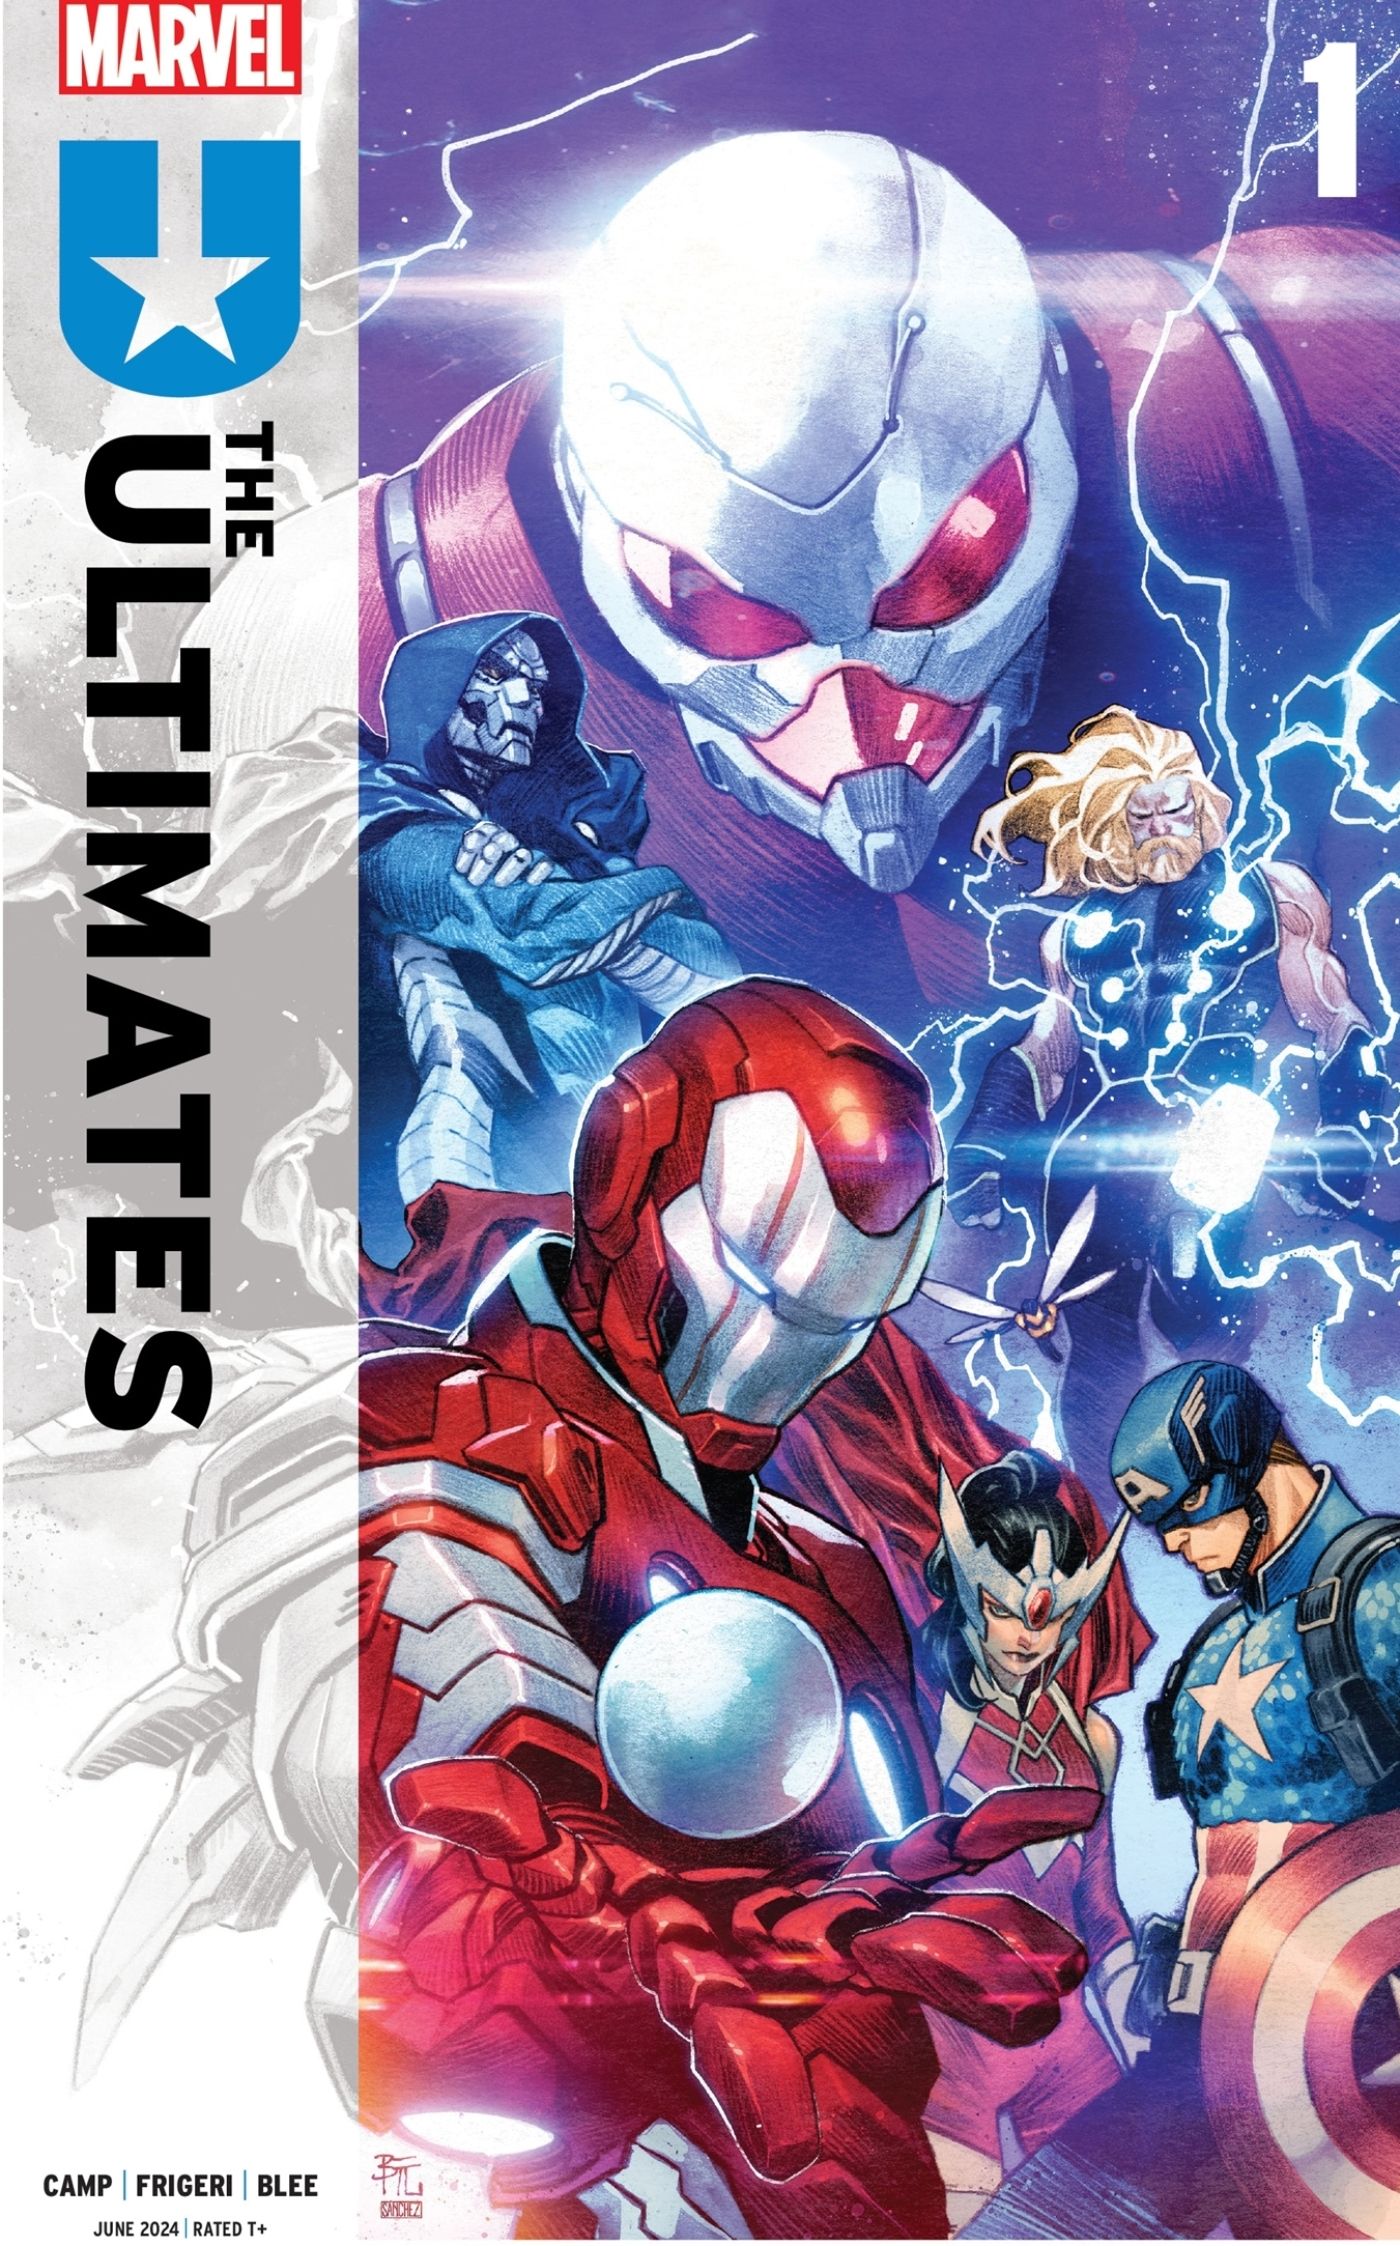 Ultimates #1 comic cover featuring Iron Lad, Captain America, and Thor.